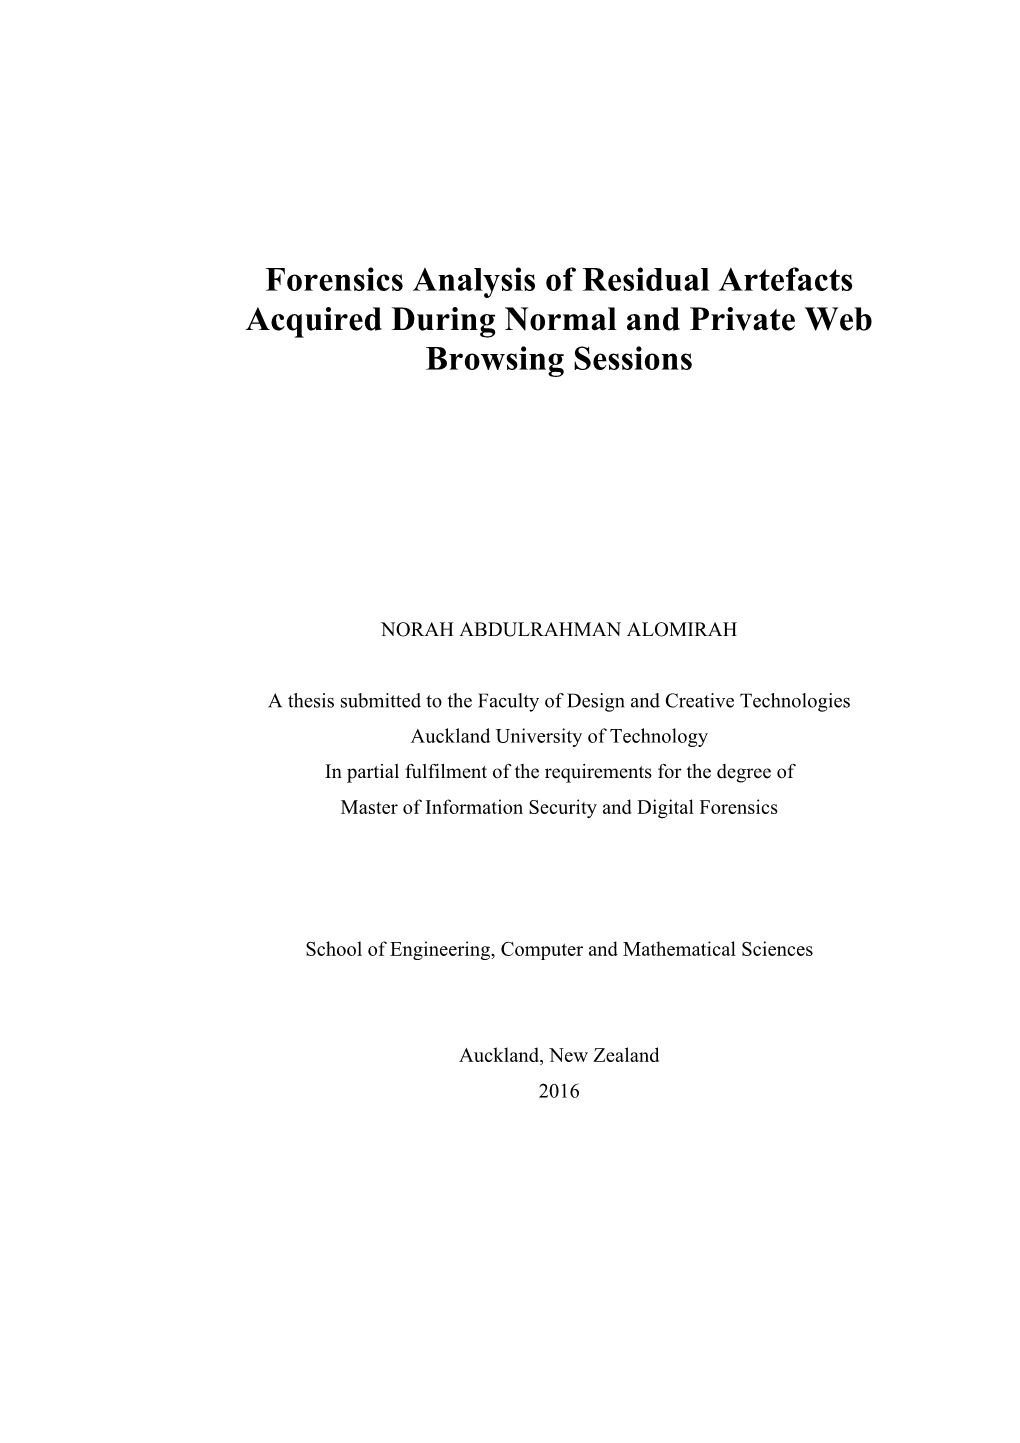 Forensics Analysis of Residual Artefacts Acquired During Normal and Private Web Browsing Sessions